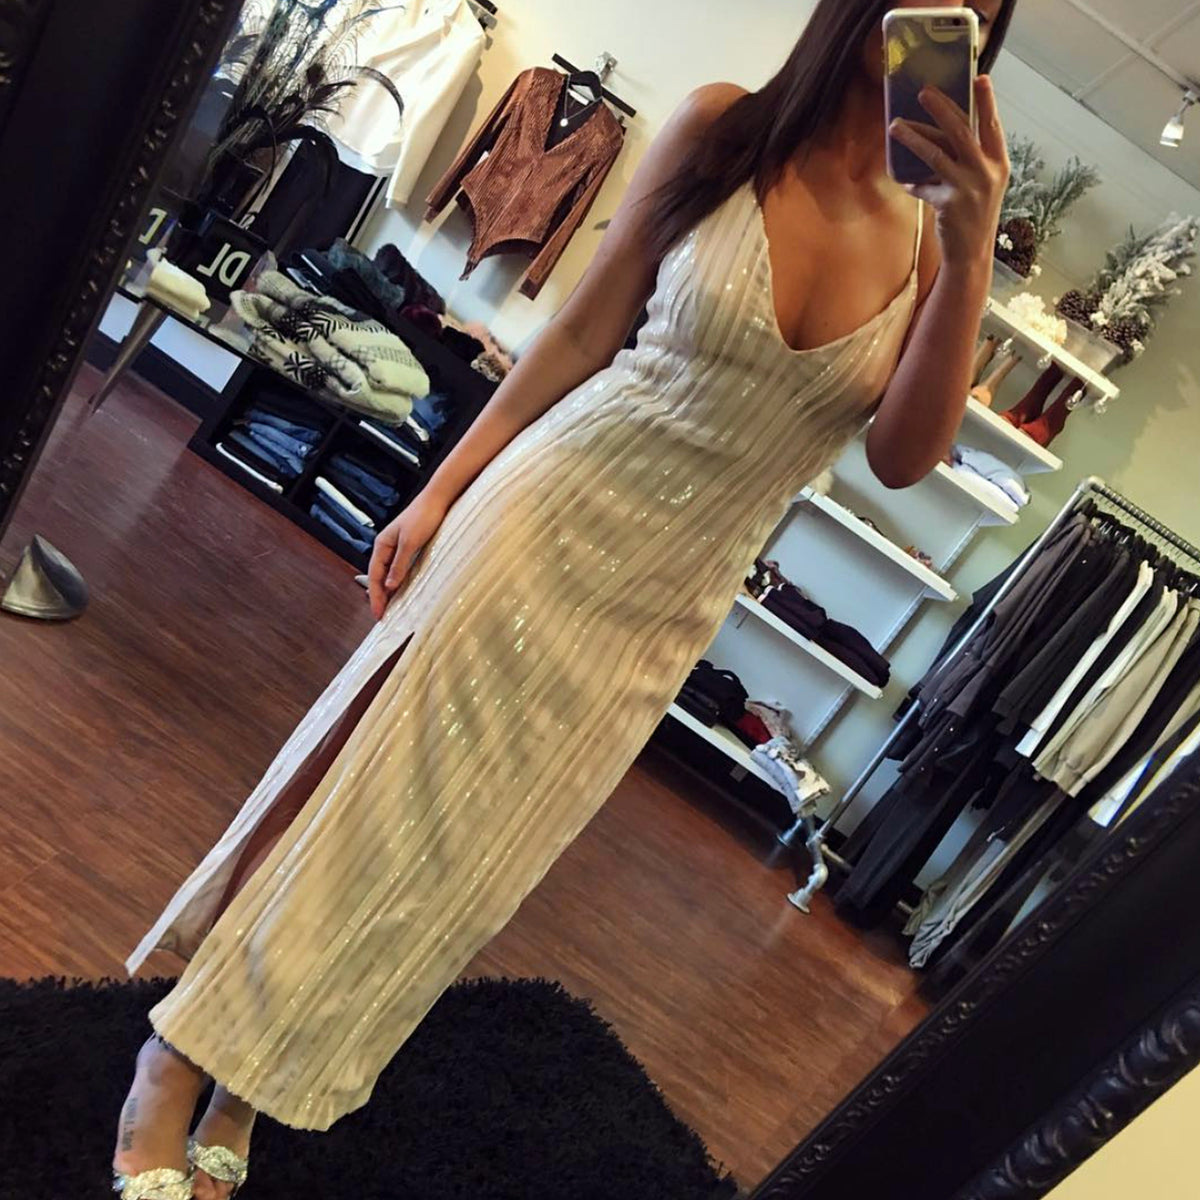 The Jetset Diaries Power of Love Maxi Dress